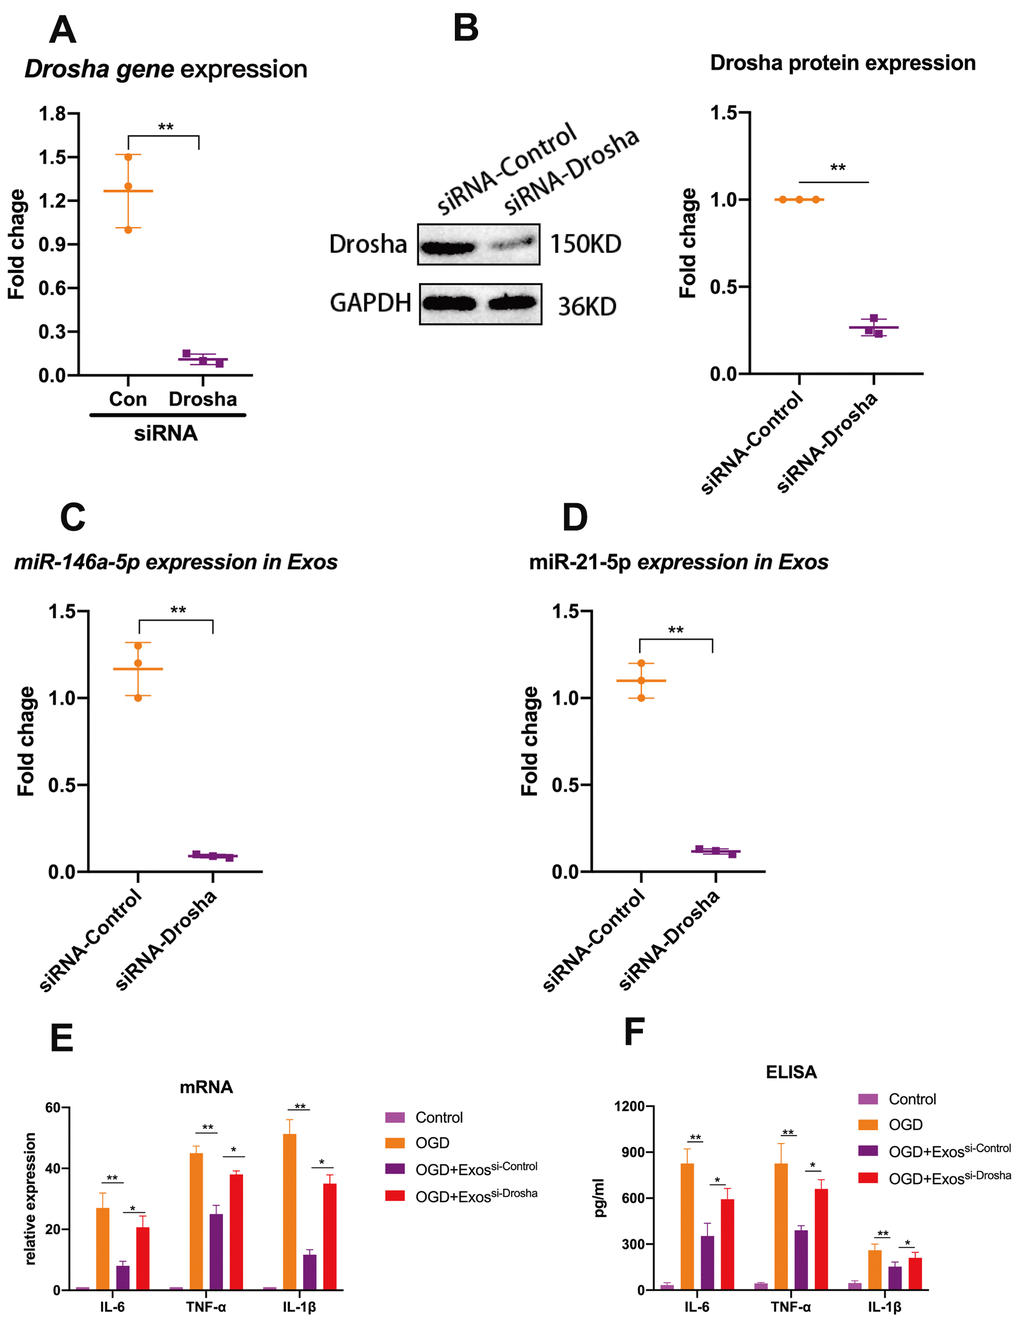 Exosomal miRNAs are implicated in hUMSC-Exos-mediated attenuation of microglial pro-inflammatory activity. (A, B) After 24 hours’ siRNA-Drosha transfection, hUMSC Drosha knockdown efficiency was evaluated by qPCR quantitation of Drosha mRNA and western blot-based quantitation of Drosha protein. Western blots are representative of three independent experimental replicates. (C, D) Exosomal miR-146a-5p and miR-21-5p content was significantly decreased after Drosha knockdown. (E) Protein levels of the pro-inflammatory cytokines IL-6, TNF-α, and IL-1β in hUMSC-Exos were decreased after Drosha knockdown. (F) Detection of IL-6, TNF-α, and IL-1β mRNA levels via qRT-PCR. Data are expressed as mean ± SEM. (A-F) Each experiment is representative of n = 3 per group. Significant differences are indicated (*p 